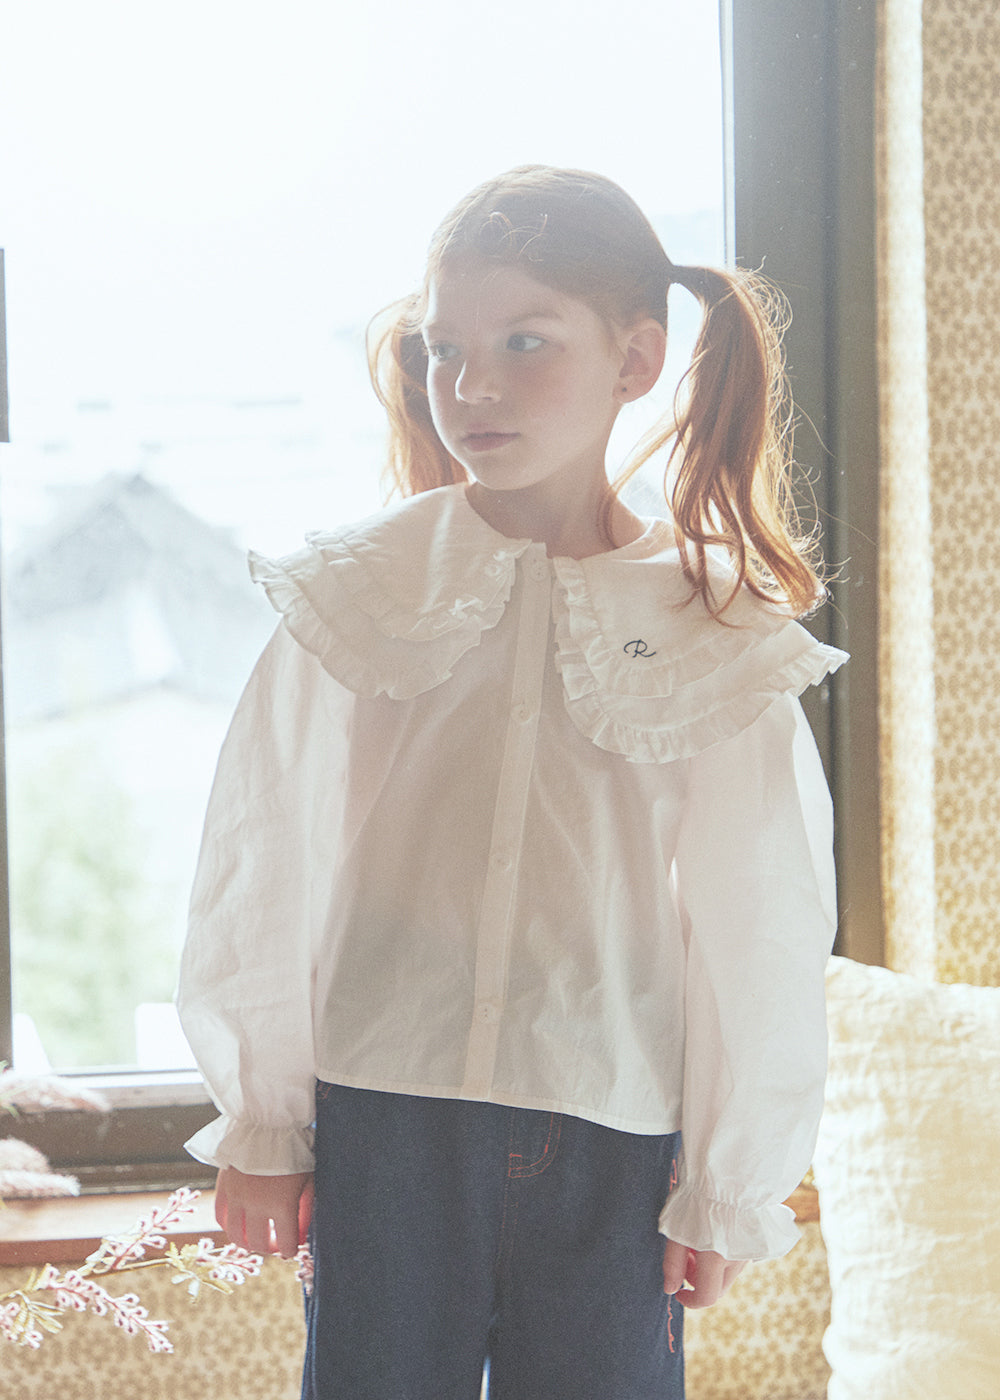 Frill Blouse